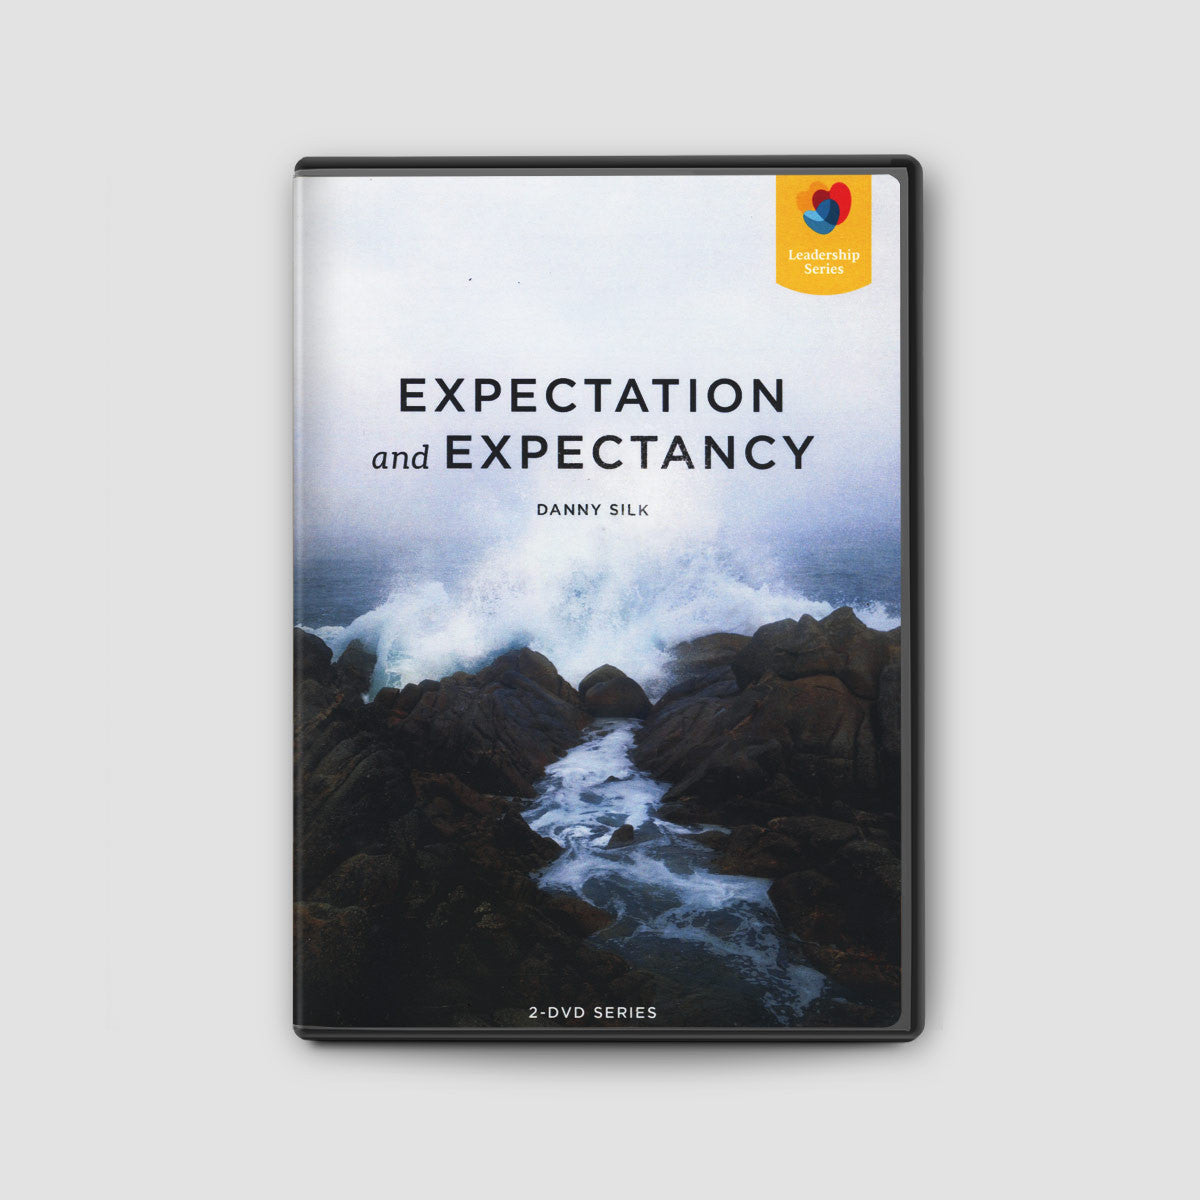 Expectation and Expectancy